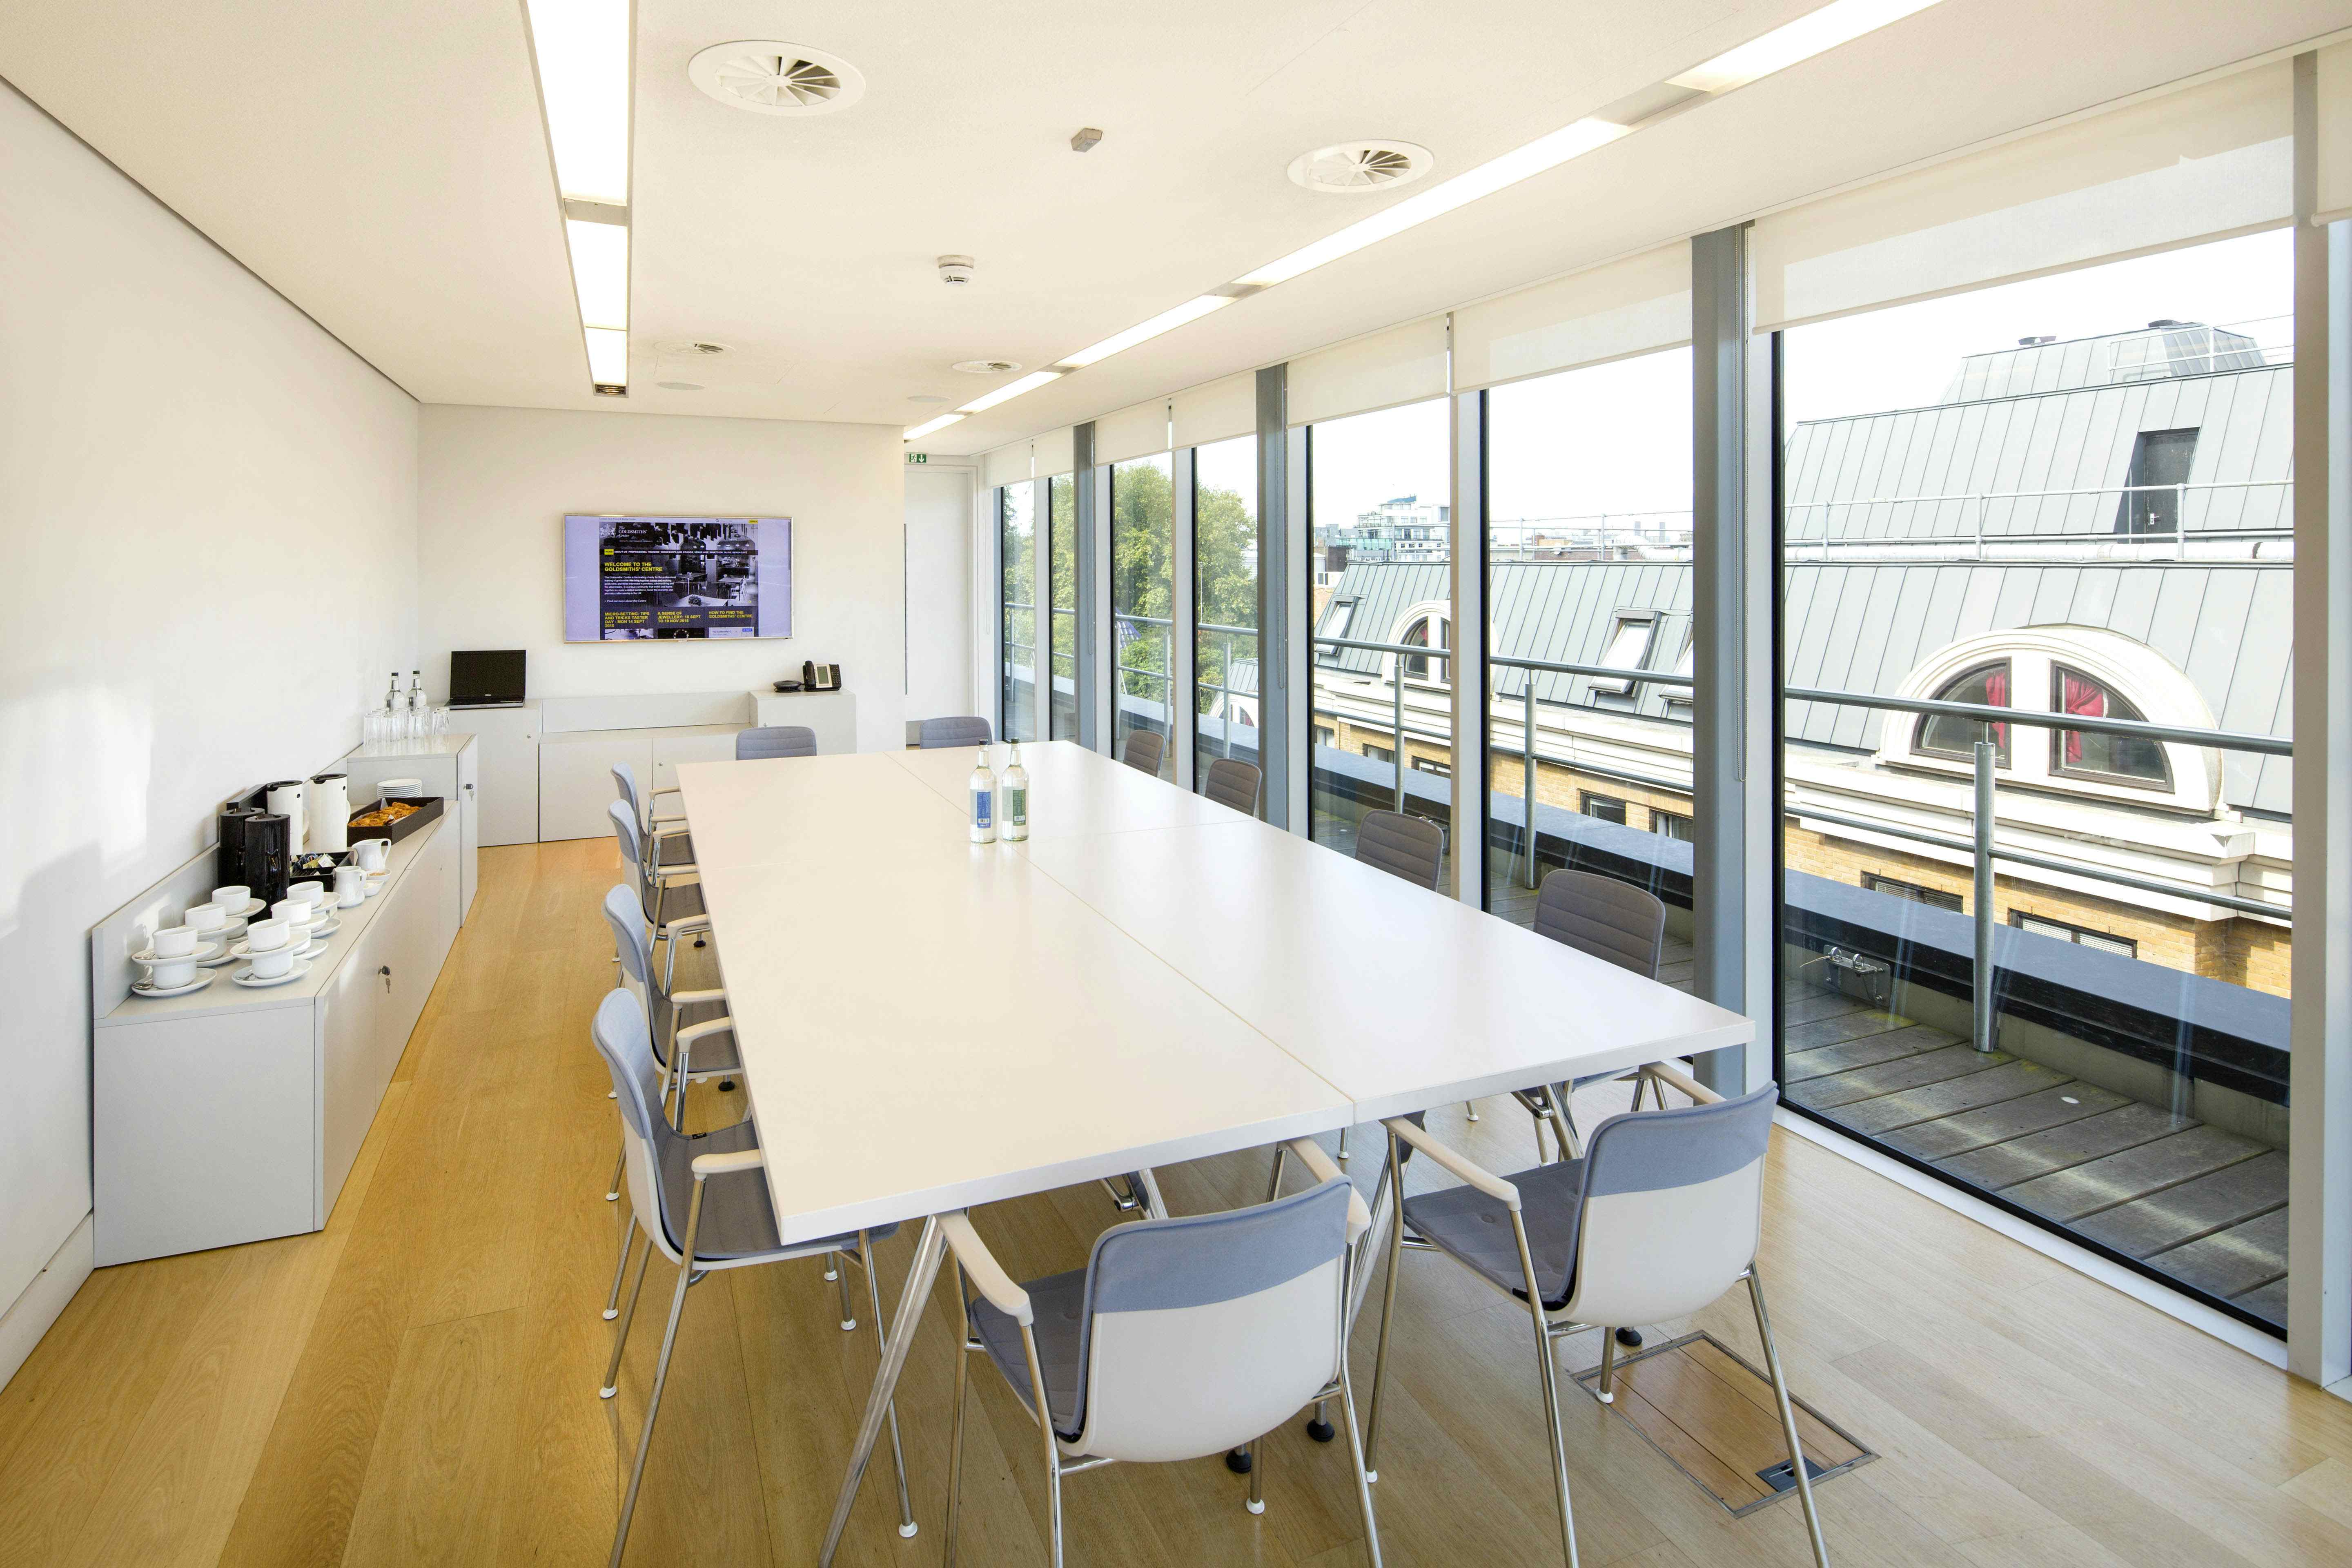 Agas Harding Board Room, The Goldsmiths' Centre